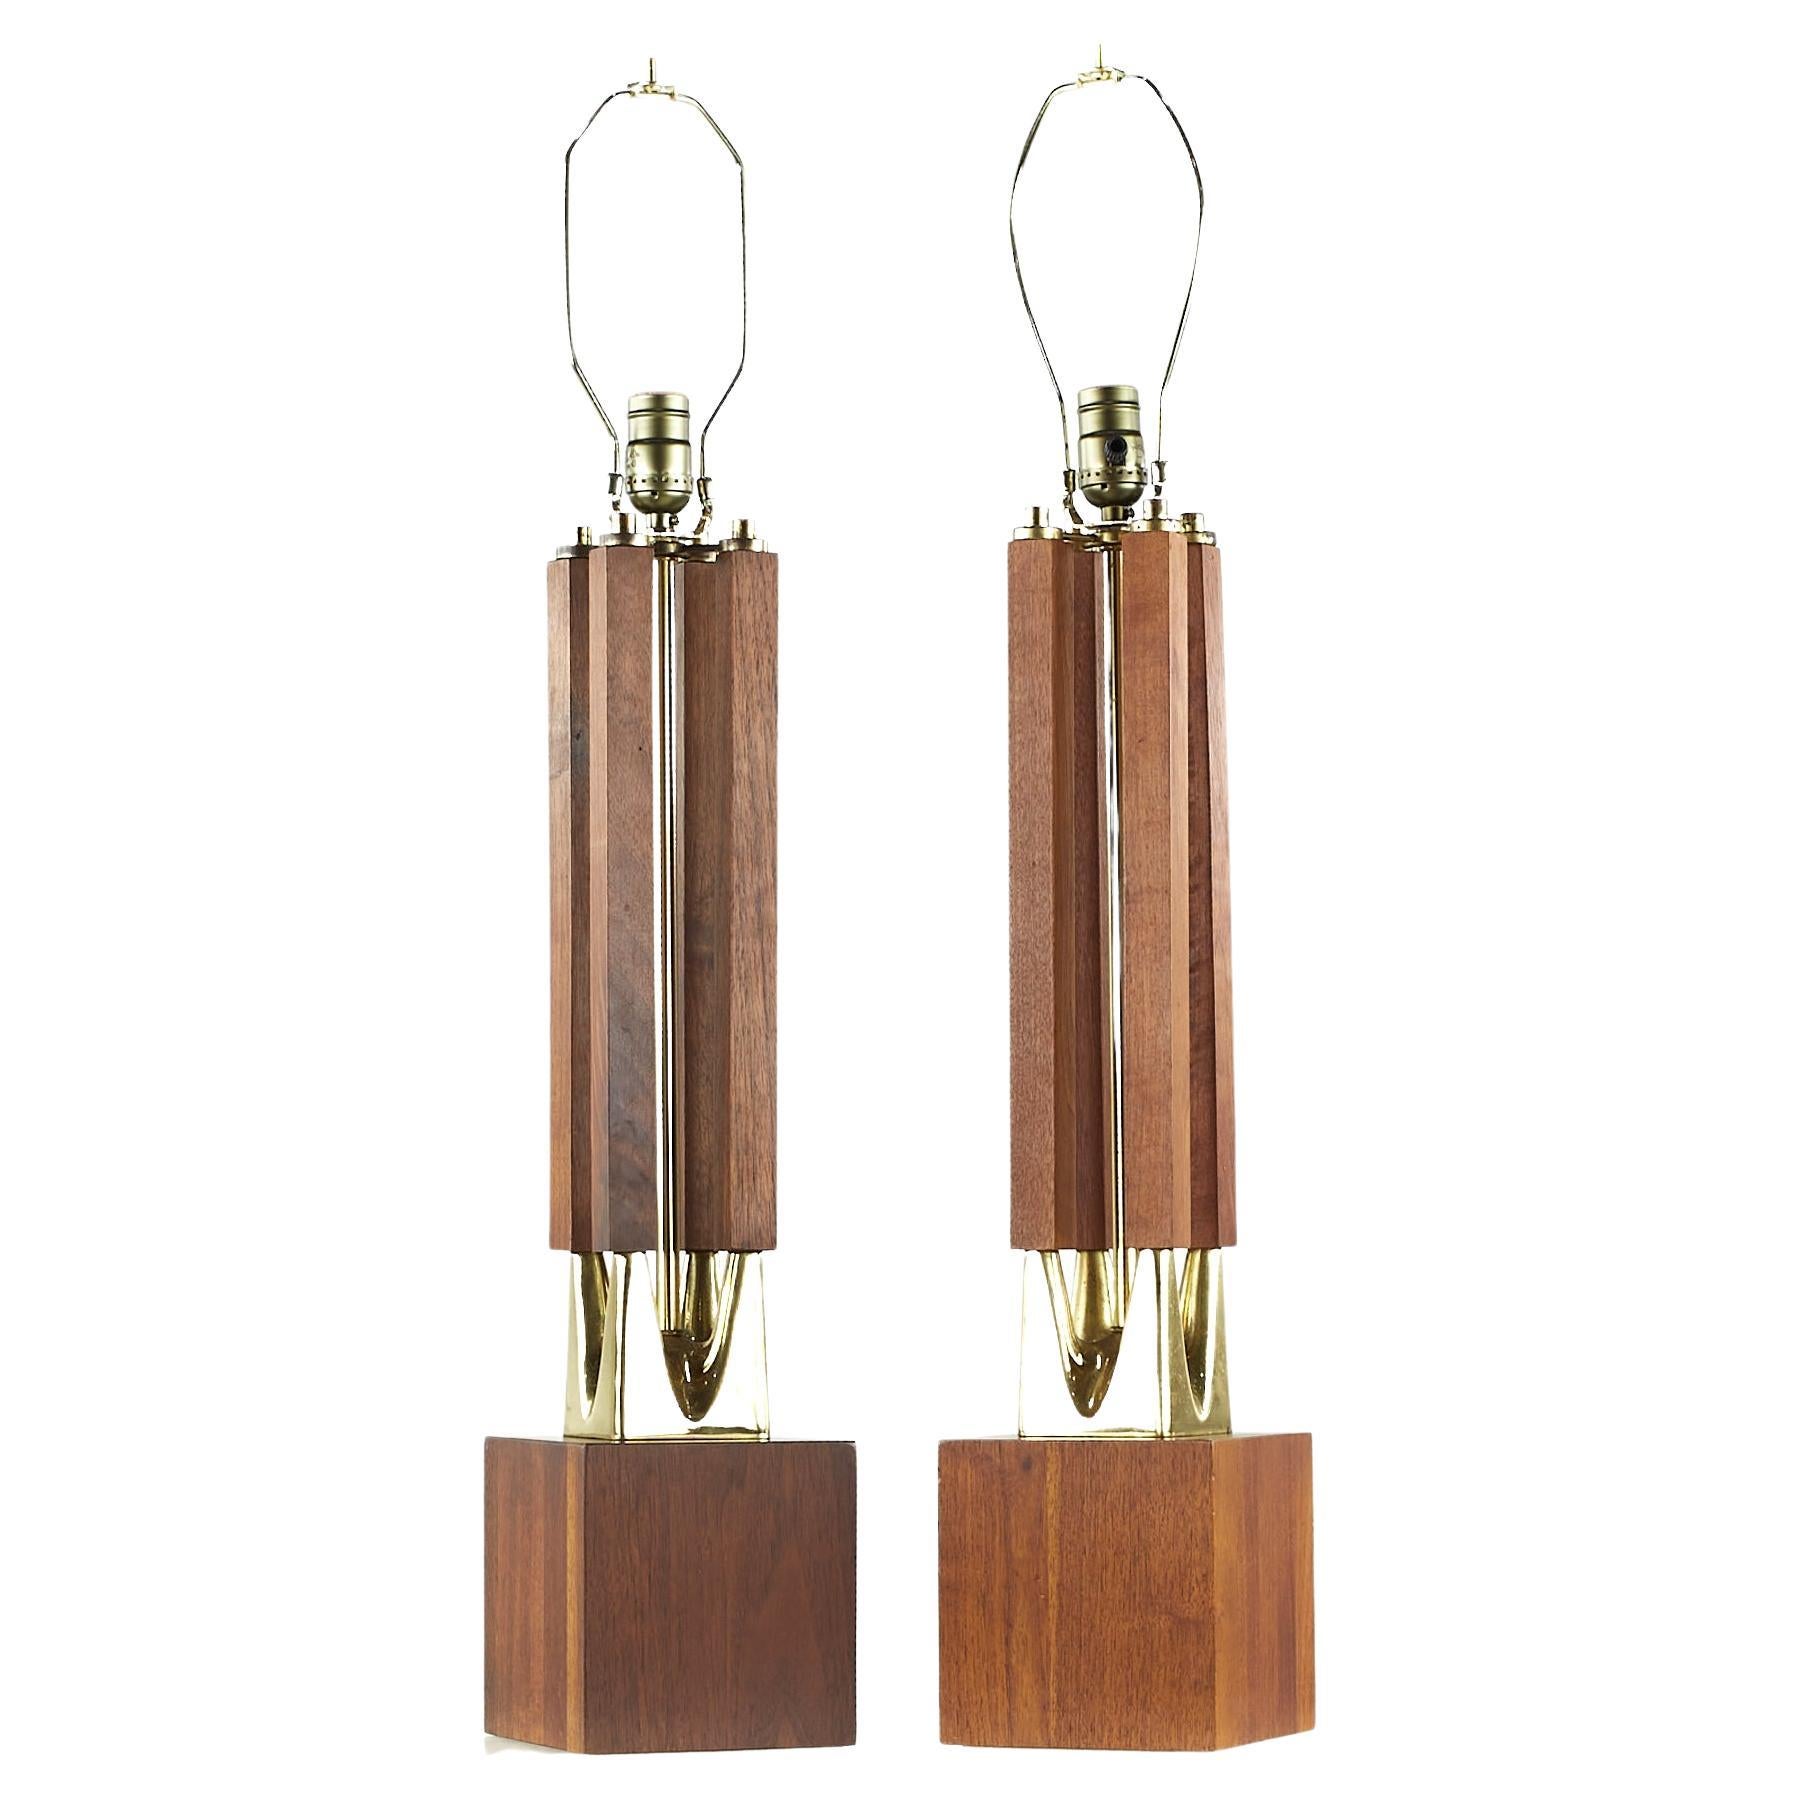 Laurel midcentury Brass and Walnut Table Lamps – Pair

Each lamp measures: 5.75 wide x 5.75 deep x 33.5 inches high

We take our photos in a controlled lighting studio to show as much detail as possible. We do not photoshop out blemishes. 

We